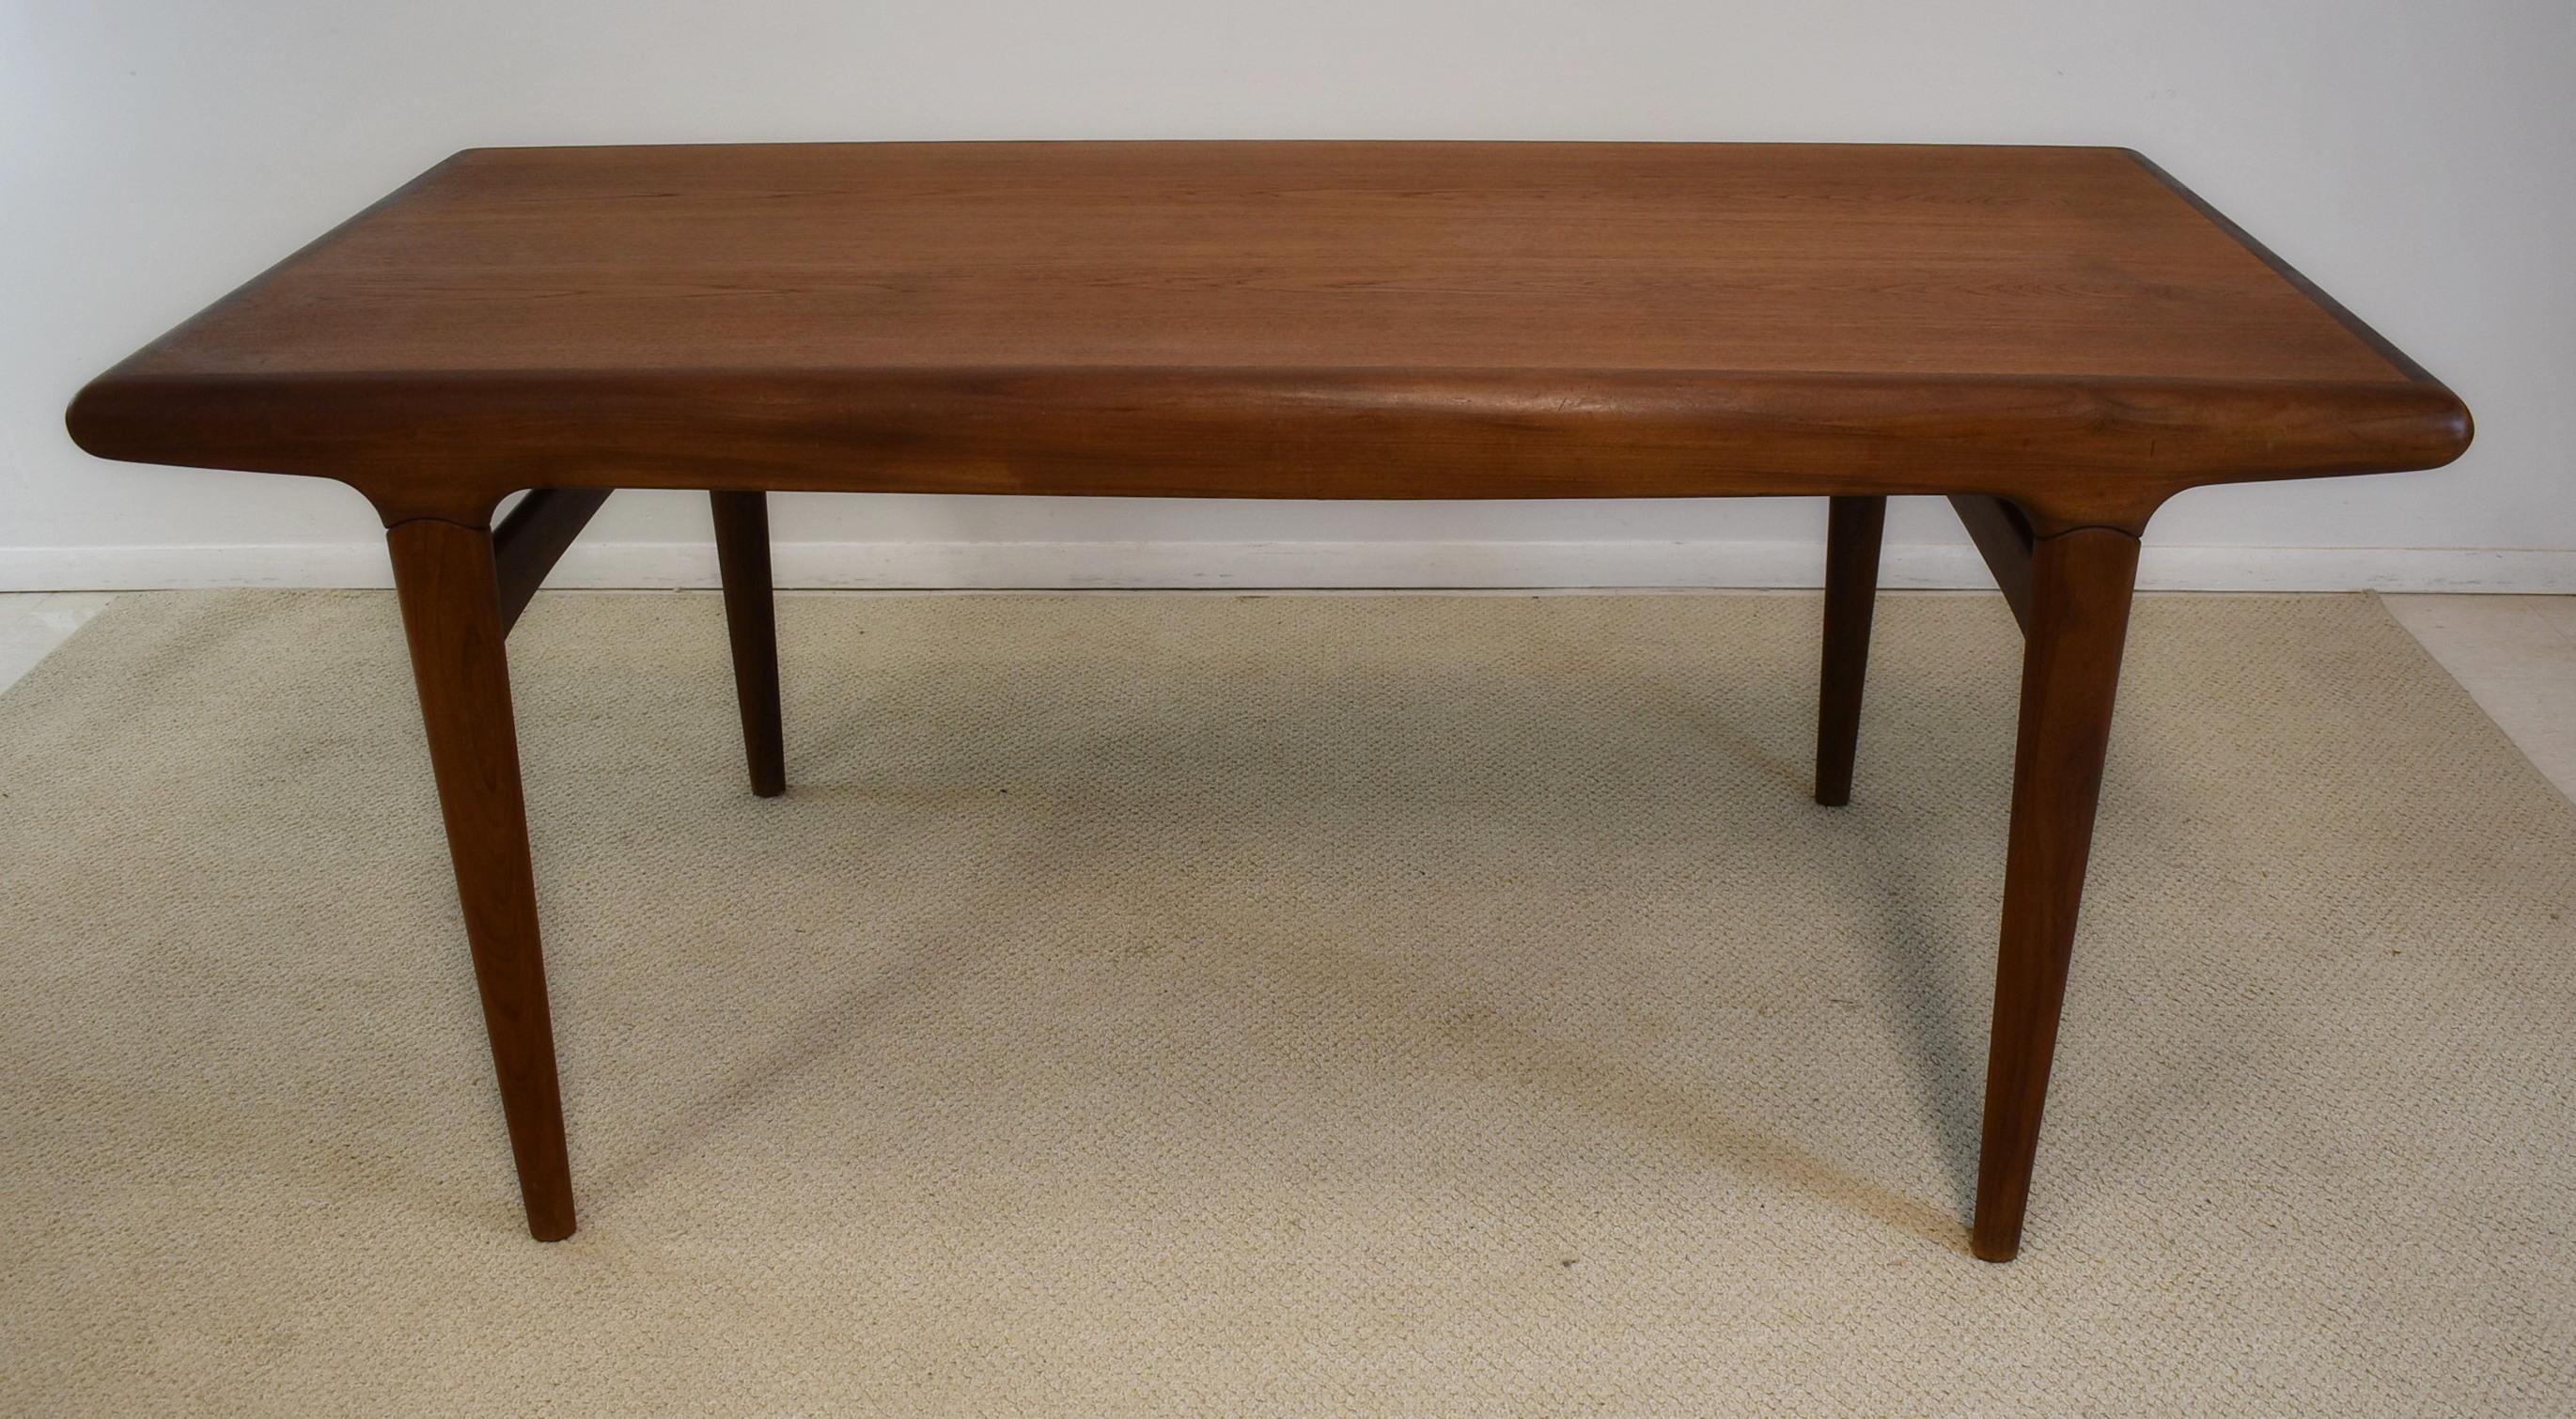 Mid-Century Modern Danish teak expandable dining table and six chairs. Original finish in very good to excellent condition. Two leaves total length of 120